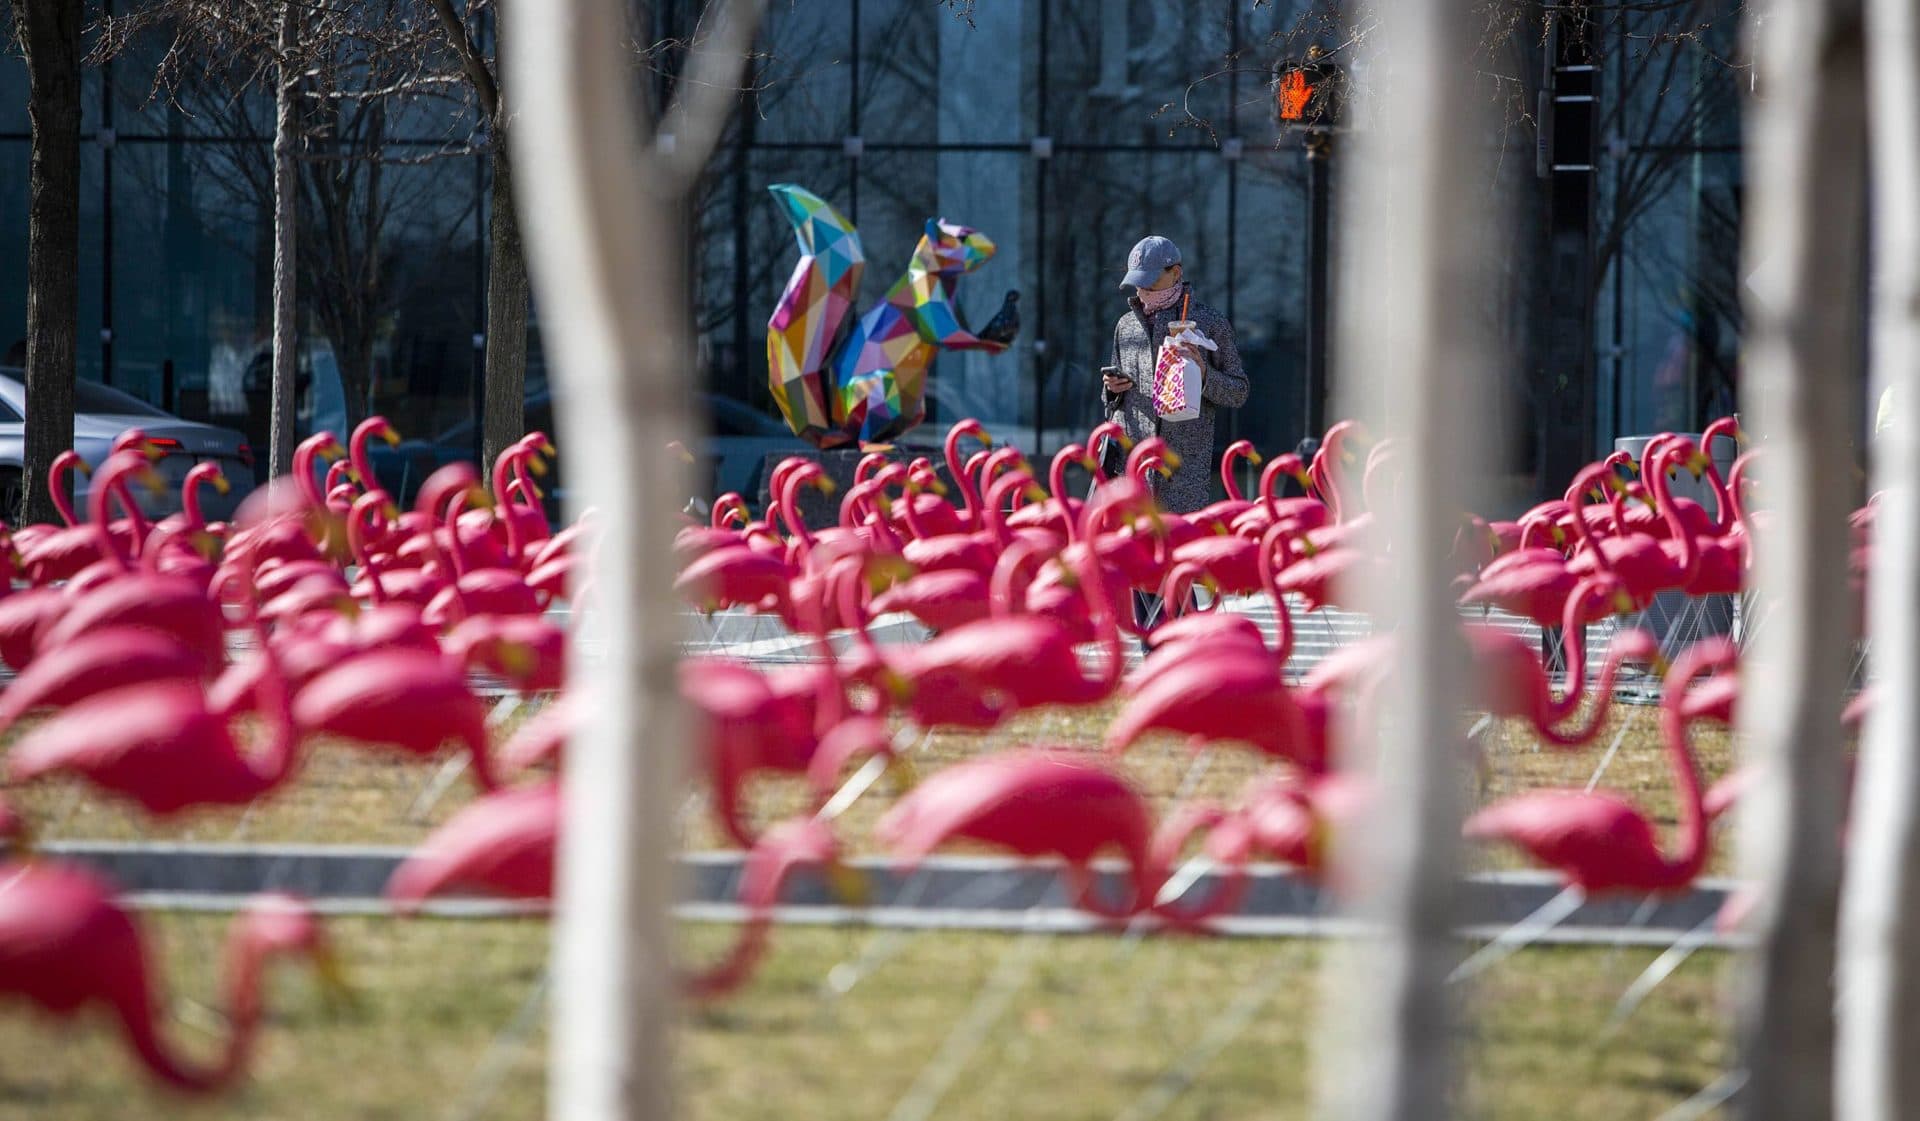 A giant, rainbow squirrel and a flock of plastic flamingos are among the public art installations brought to Boston by WS Development. (Robin Lubbock/WBUR)